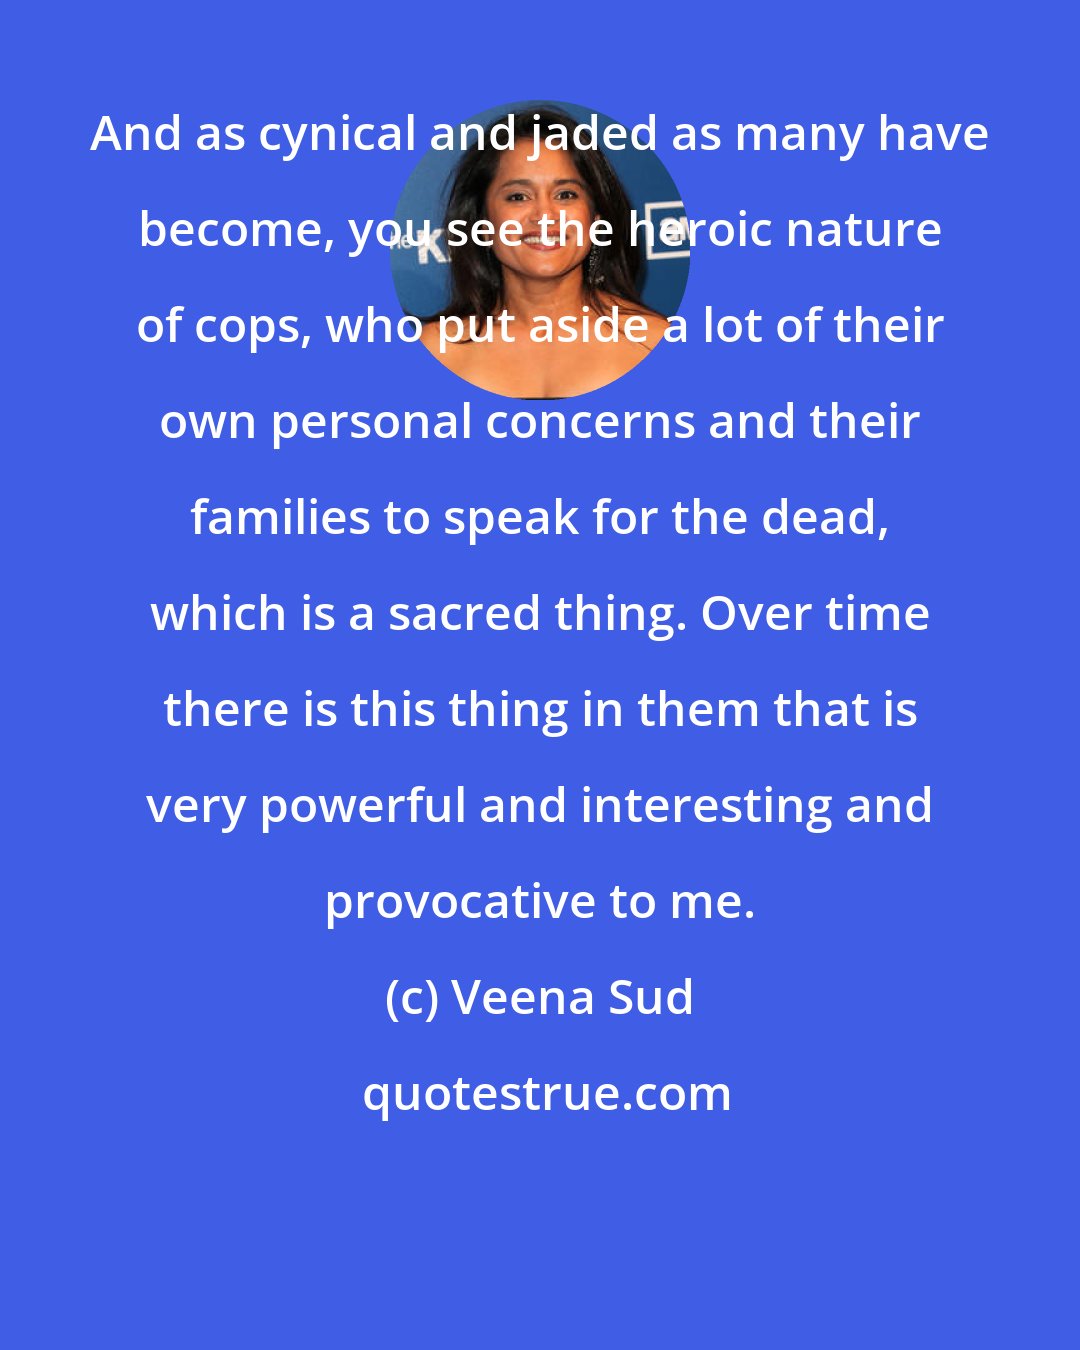 Veena Sud: And as cynical and jaded as many have become, you see the heroic nature of cops, who put aside a lot of their own personal concerns and their families to speak for the dead, which is a sacred thing. Over time there is this thing in them that is very powerful and interesting and provocative to me.